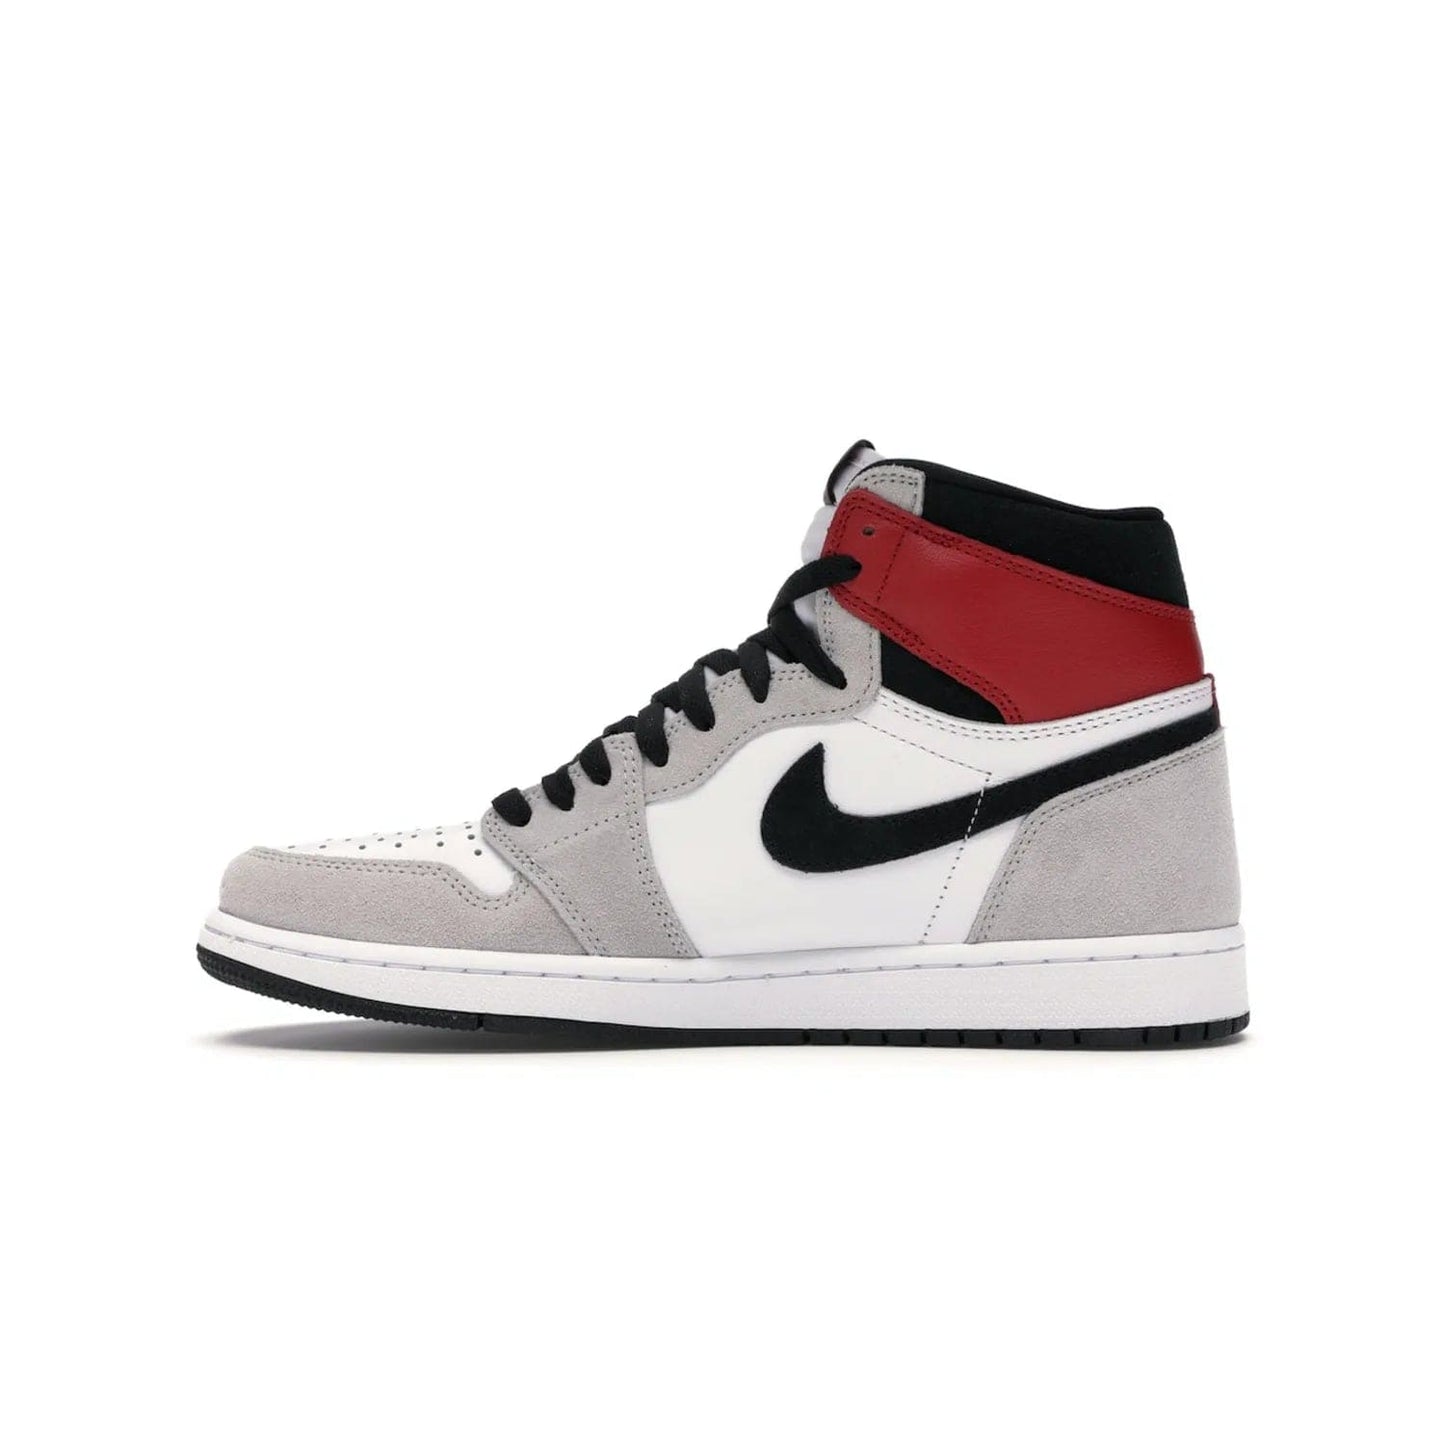 Jordan 1 Retro High Light Smoke Grey - Image 19 - Only at www.BallersClubKickz.com - Comfortable and stylish, Jordan 1 Retro High Light Smoke Grey offers a unique spin on a classic design. White leather, grey suede, red leather and black details are set on a white midsole and black outsole. Get the sneaker released in July 2020 and add a twist to your wardrobe.